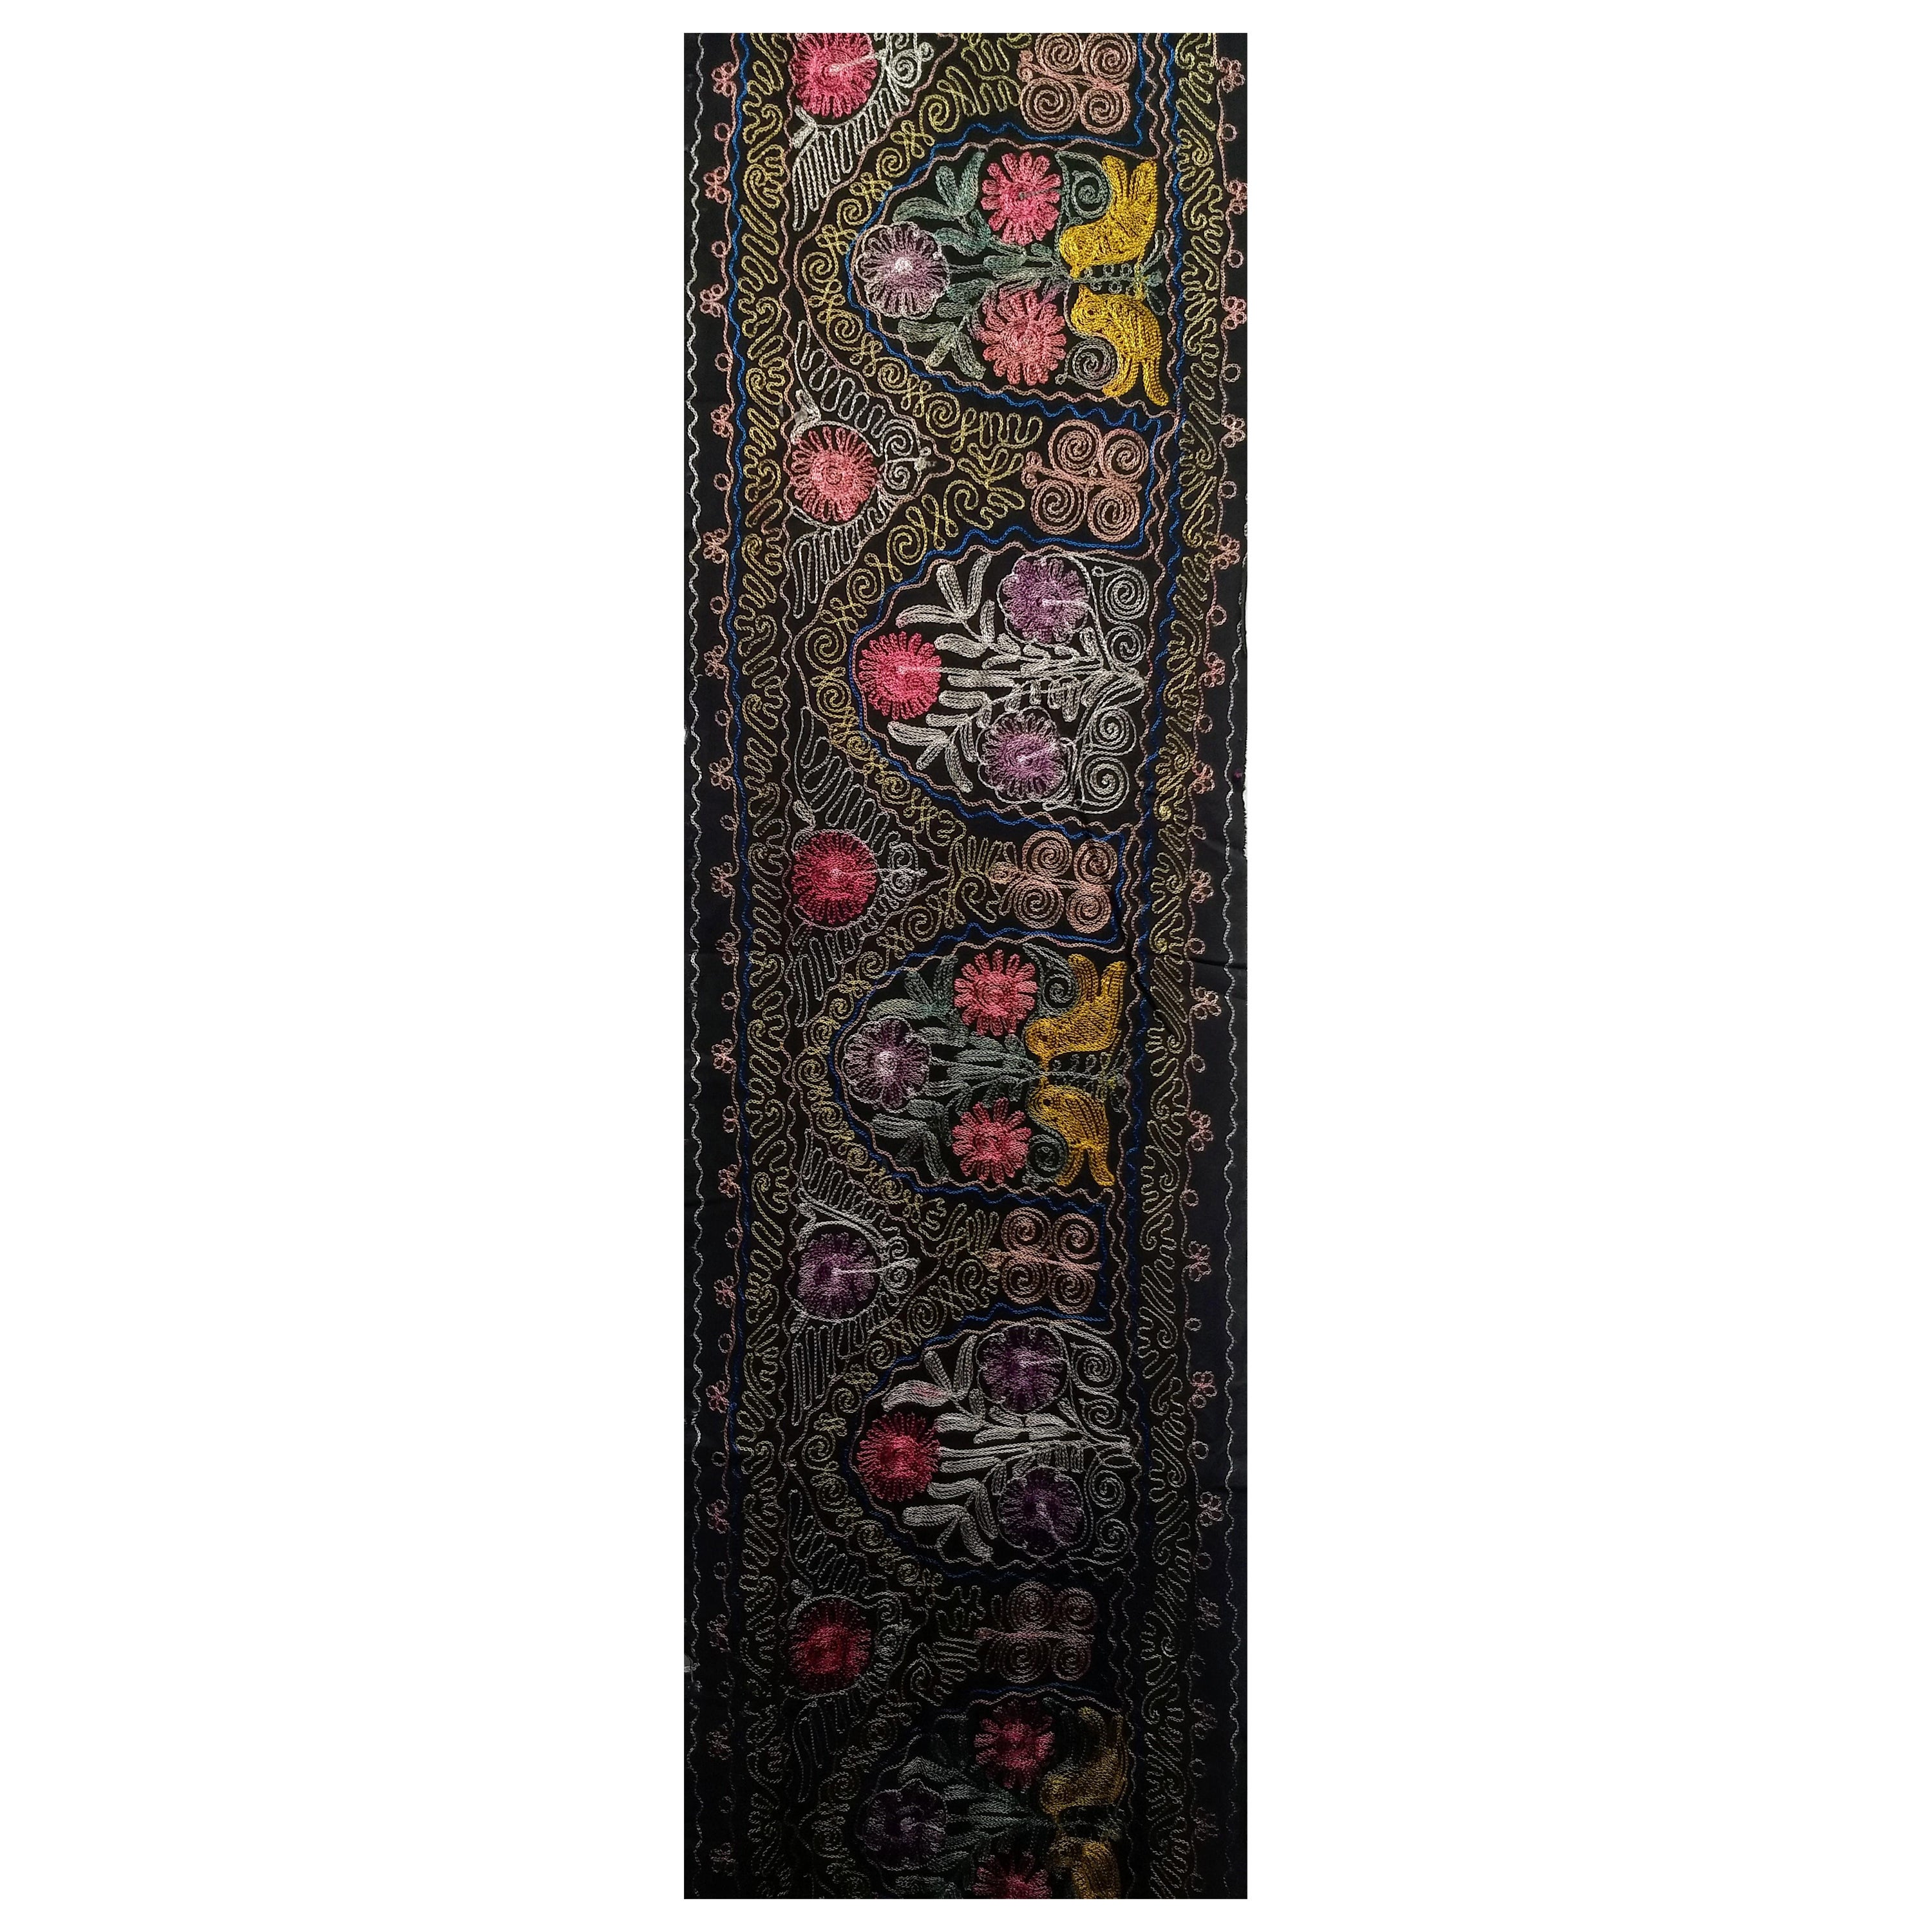  Vintage hand-crafted Suzani silk embroidery from Uzbekistan in Central Asia in black cotton background and designs in silk in black, blue, green, purple, yellow, and red.  The design of each panel consists of finely silk embroidered floral patterns